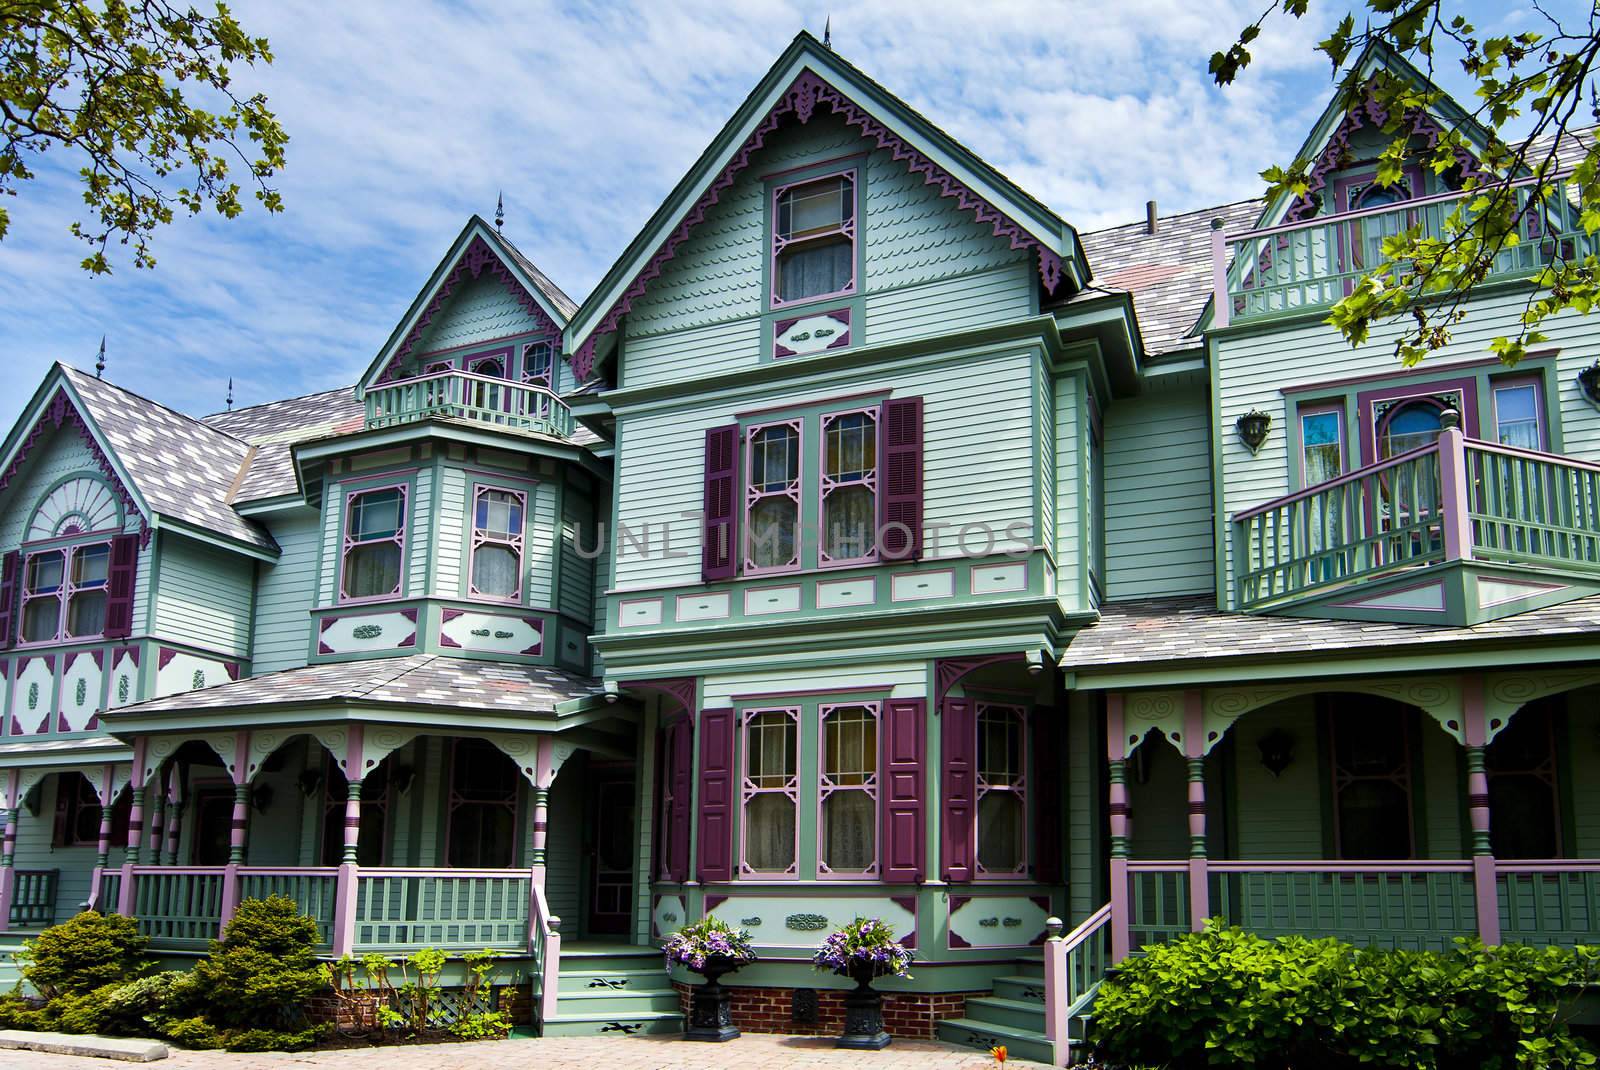 Beautiful big old nostalgic historic wooden green with purple Victorian house building with porch.